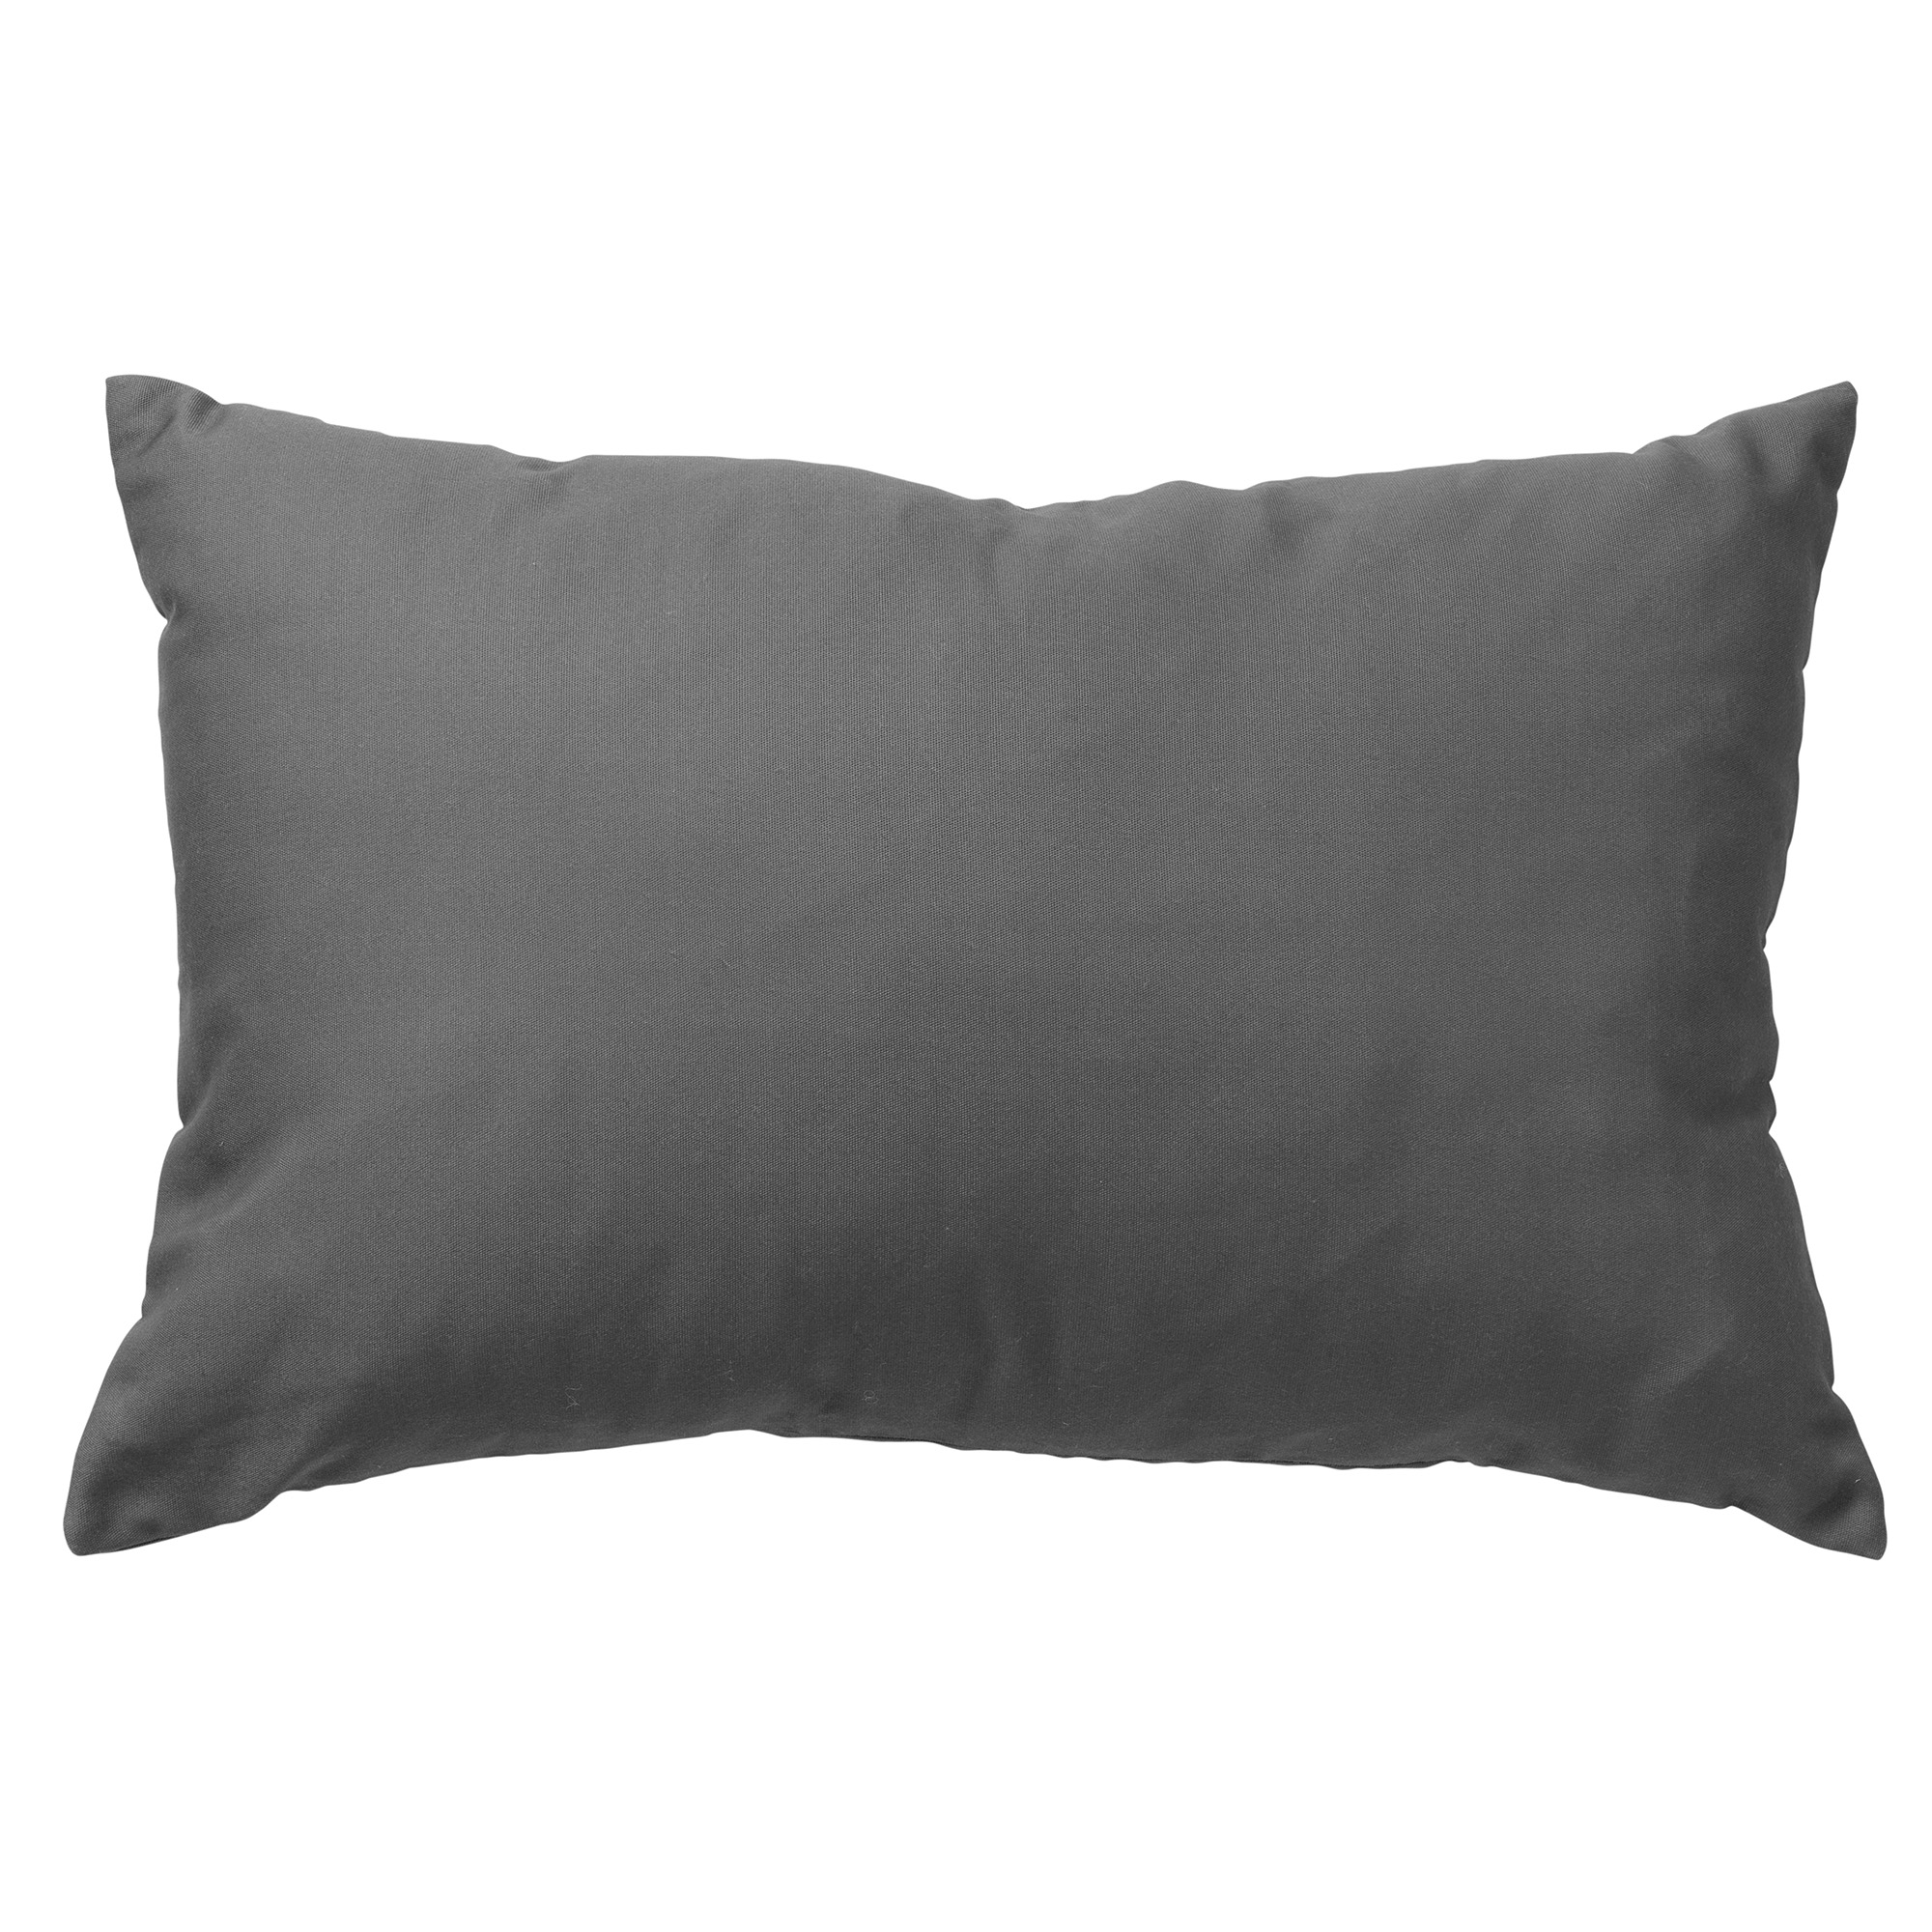 SANTORINI - Cushion outdoor 40x60 cm Charcoal Grey - water-repellent and UV-resistant - grey